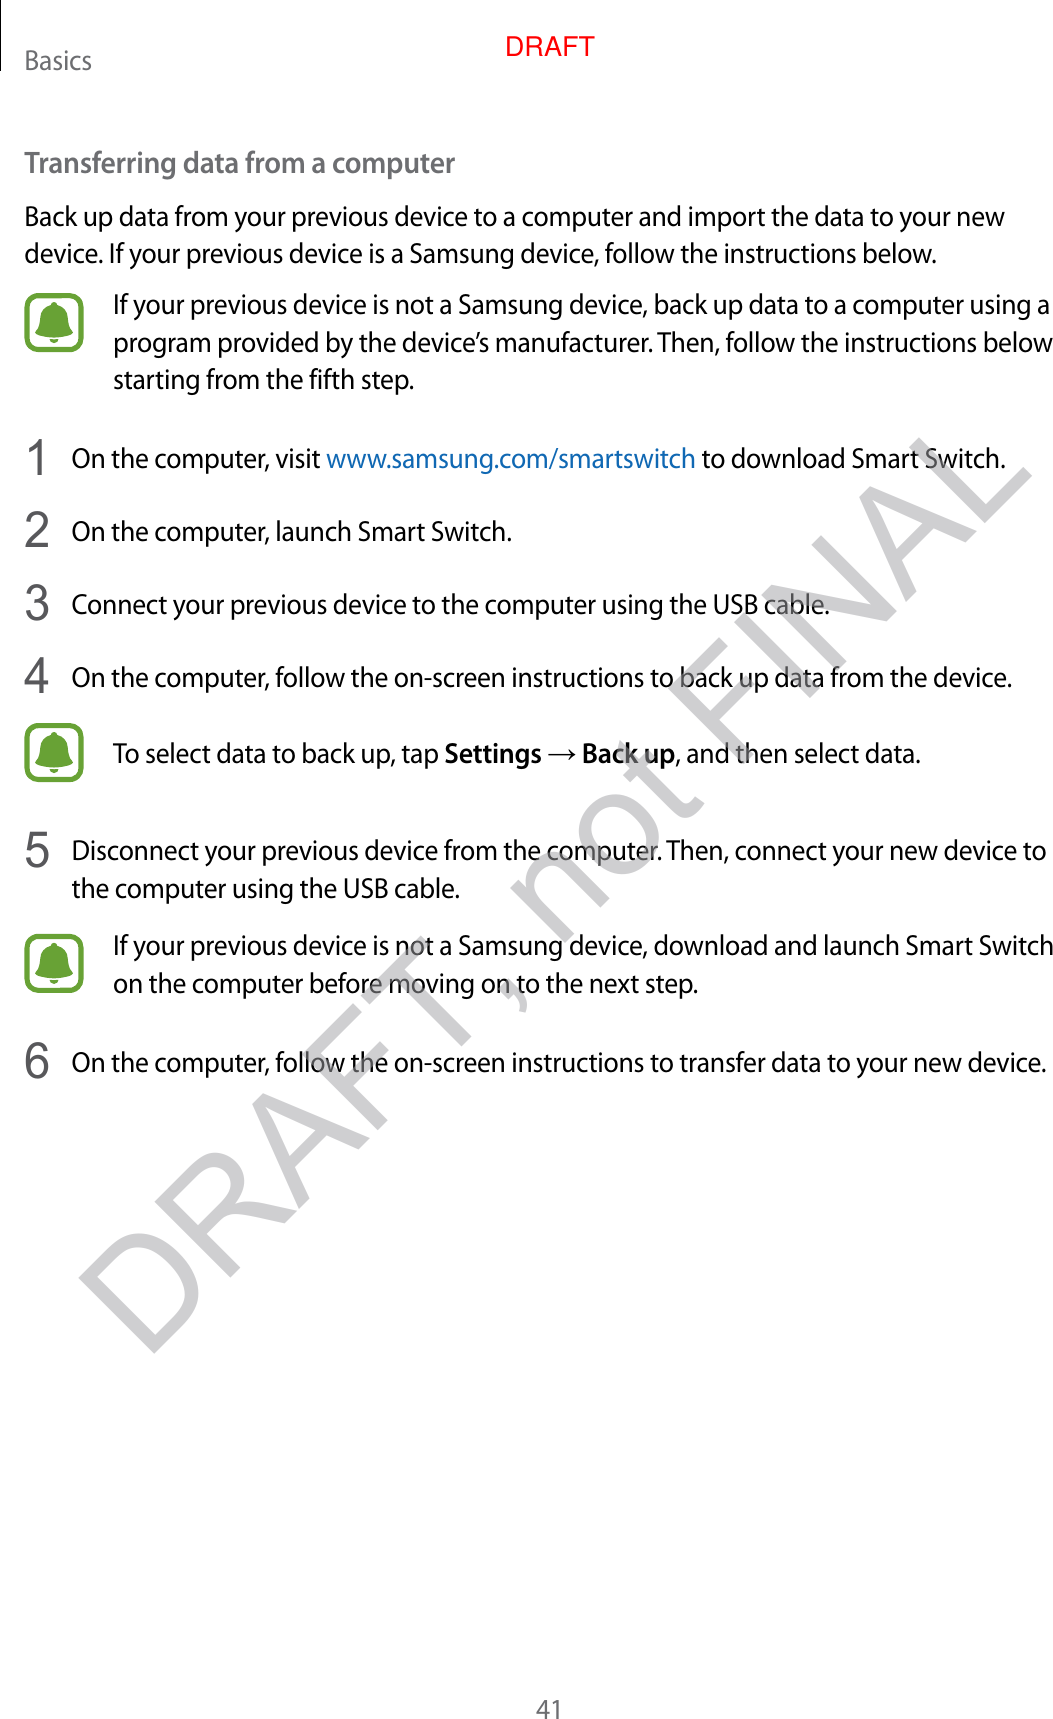 Basics41Transferring data from a computerBack up data from your previous device to a computer and import the data to your new device. If your previous device is a Samsung device, follow the instructions below.If your previous device is not a Samsung device, back up data to a computer using a program provided by the device’s manufacturer. Then, follow the instructions below starting from the fifth step.1  On the computer, visit www.samsung.com/smartswitch to download Smart Switch.2  On the computer, launch Smart Switch.3  Connect your previous device to the computer using the USB cable.4  On the computer, follow the on-screen instructions to back up data from the device.To select data to back up, tap Settings → Back up, and then select data.5  Disconnect your previous device from the computer. Then, connect your new device to the computer using the USB cable.If your previous device is not a Samsung device, download and launch Smart Switch on the computer before moving on to the next step.6  On the computer, follow the on-screen instructions to transfer data to your new device.DRAFT, not FINALDRAFT